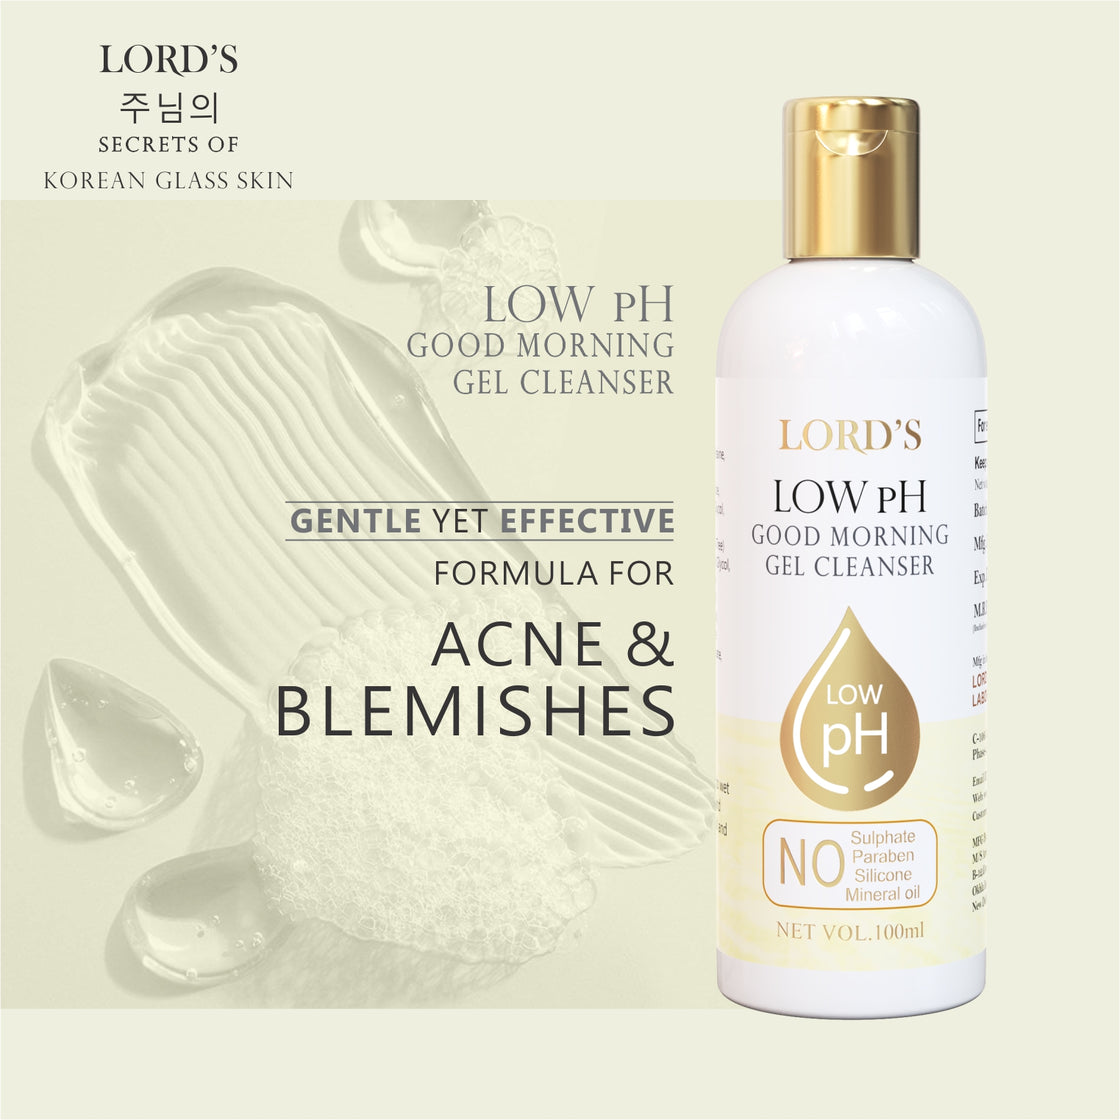 Lord's Low PH Good Morning Gel Cleanser (100ml)